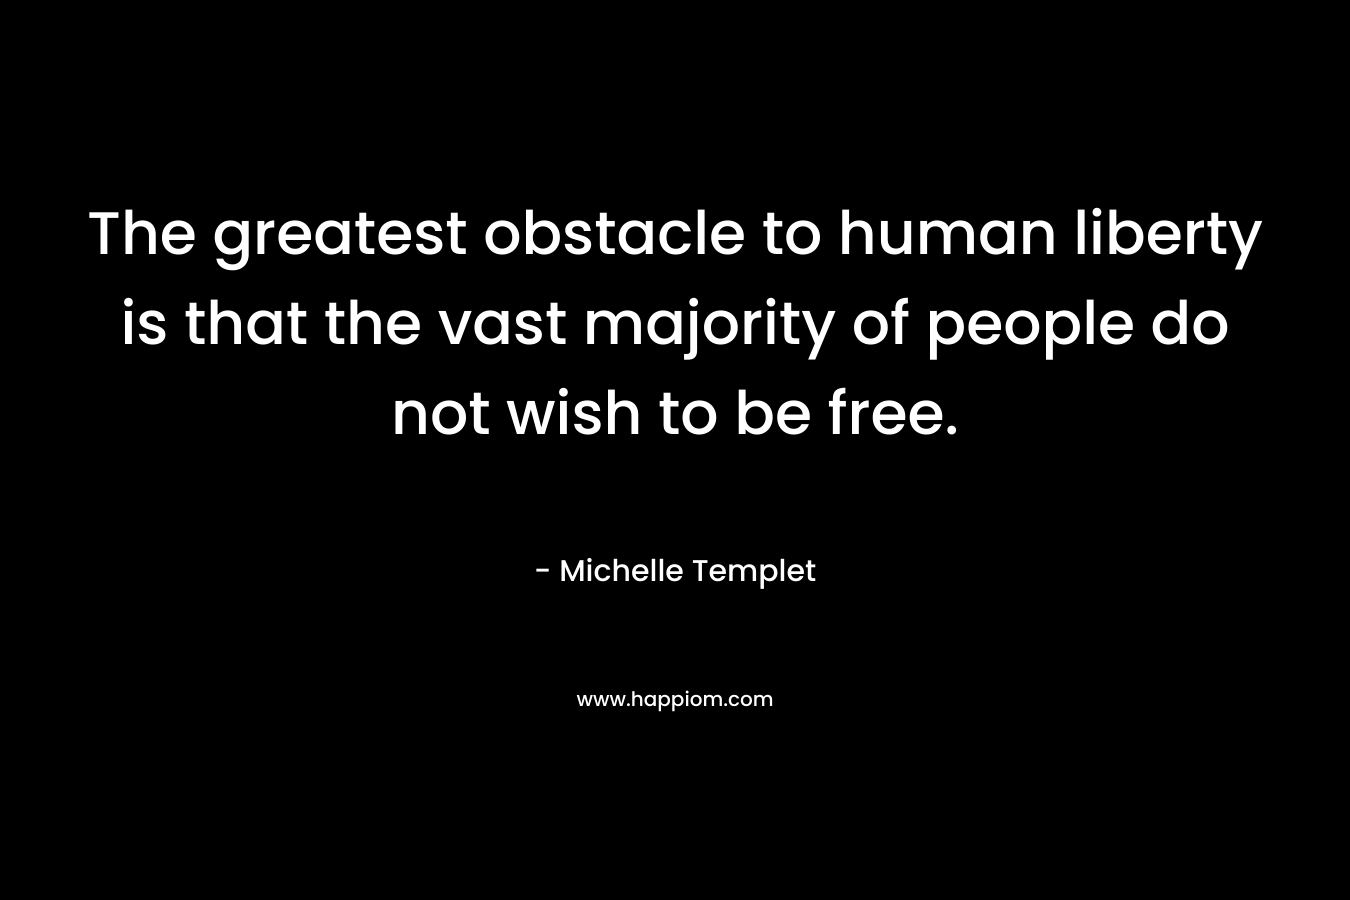 The greatest obstacle to human liberty is that the vast majority of people do not wish to be free.